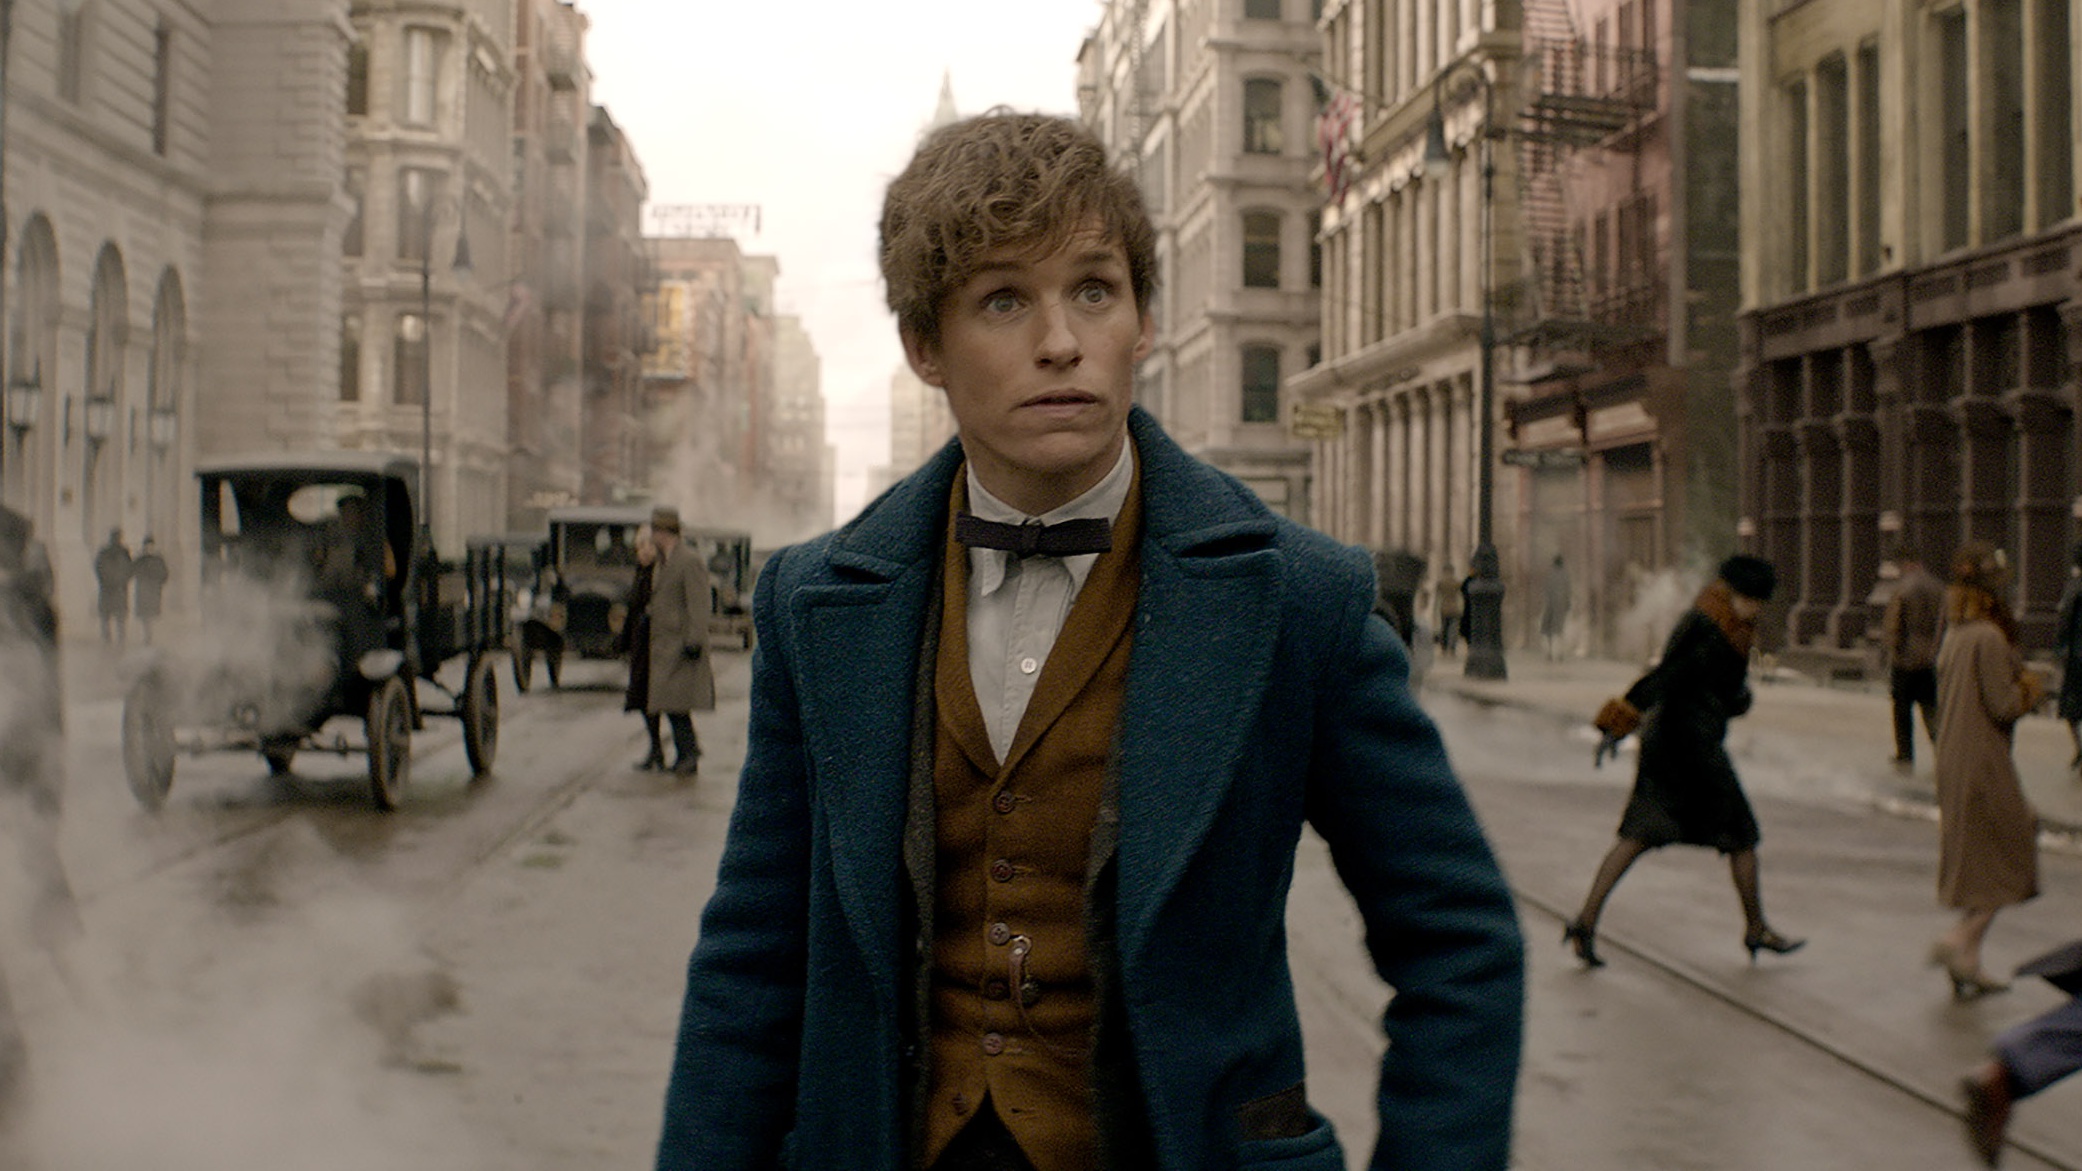 Hd 2016 Watch Film Fantastic Beasts And Where To Find Them Online